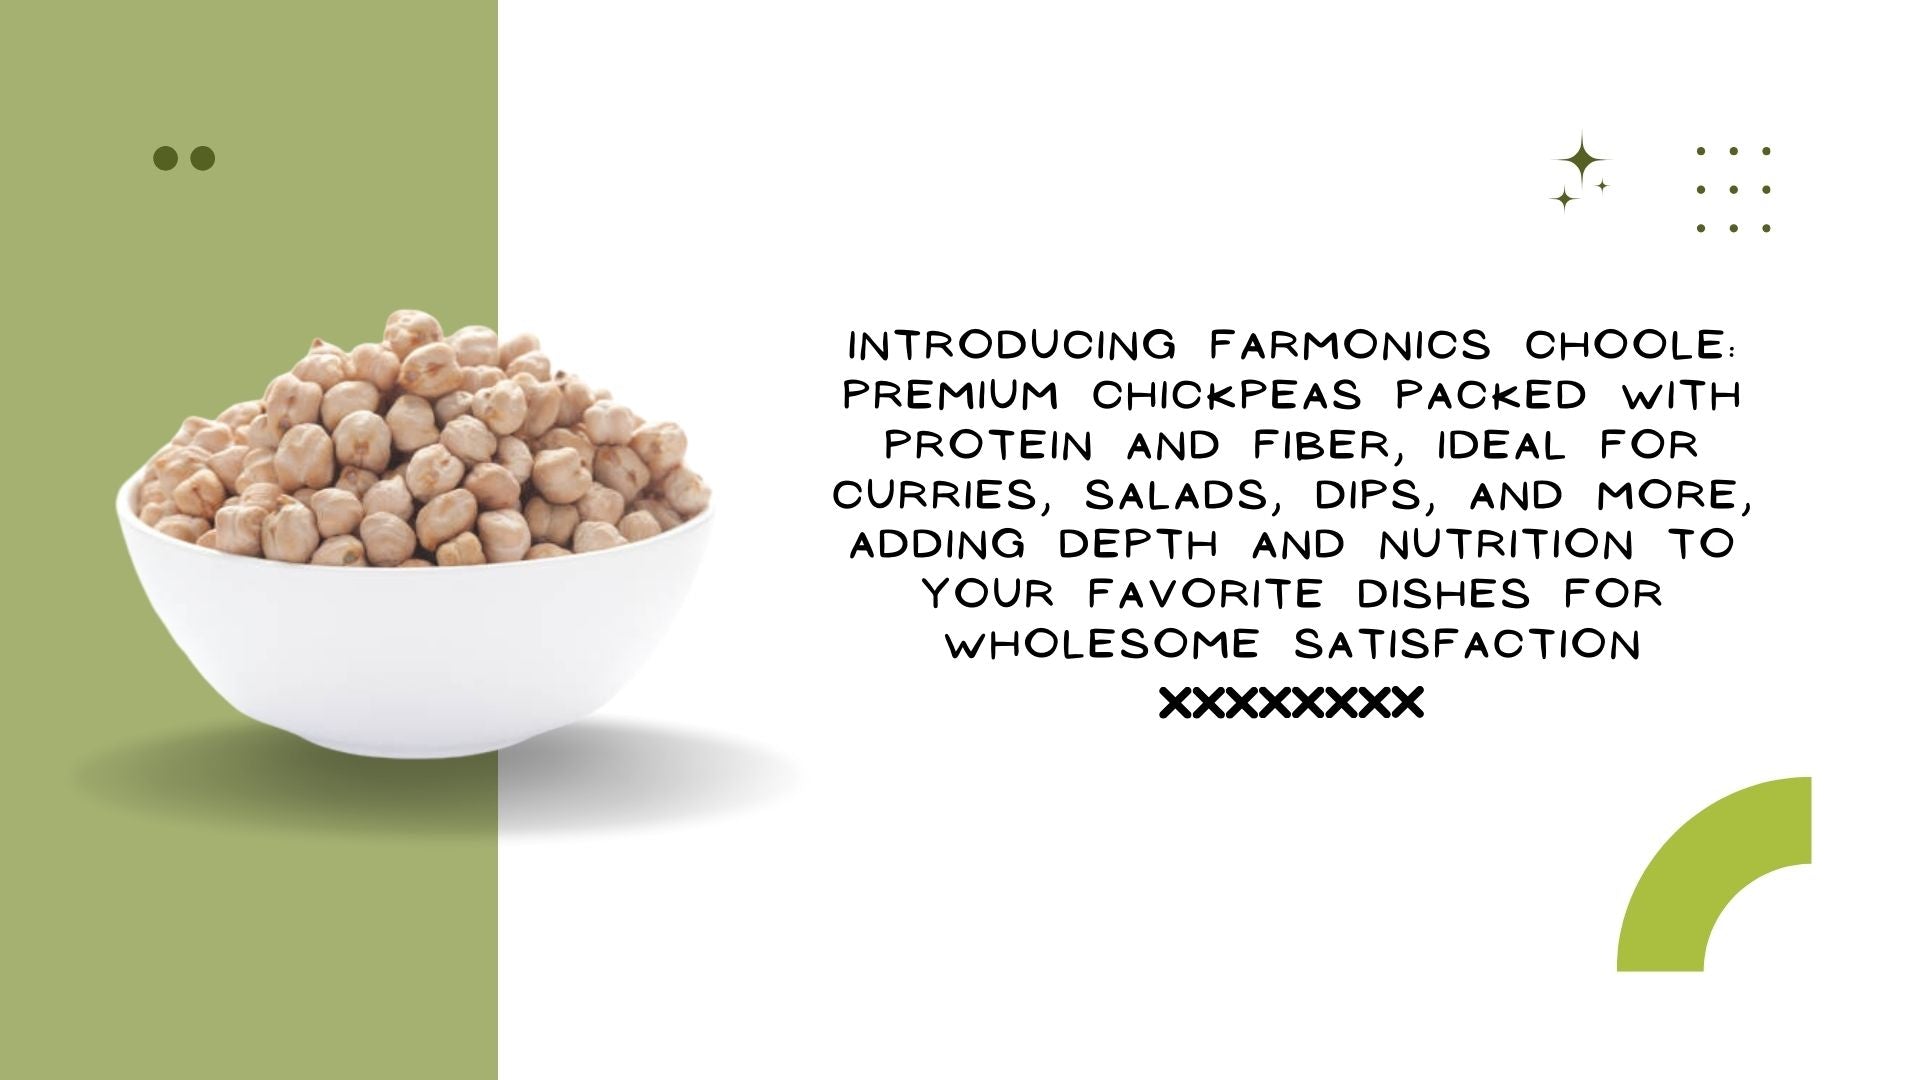 Here are some of the information about Farmonics best quality choole